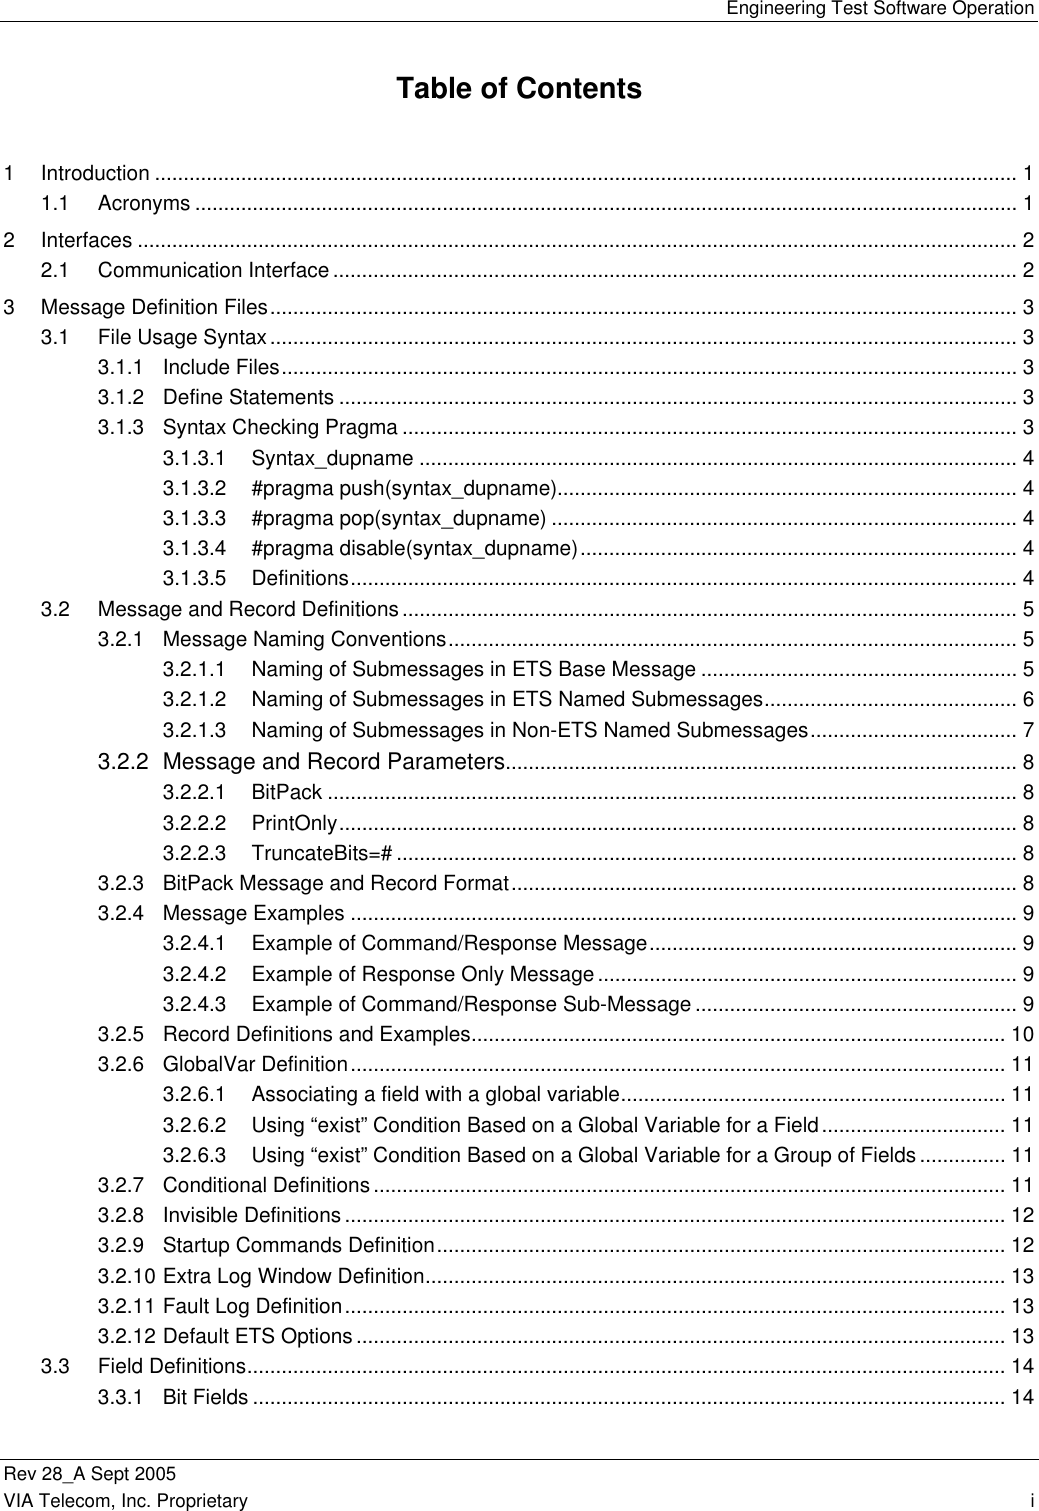   Engineering Test Software Operation Rev 28_A Sept 2005   VIA Telecom, Inc. Proprietary    i  Table of Contents 1 Introduction ...................................................................................................................................................... 1 1.1 Acronyms ............................................................................................................................................... 1 2 Interfaces ......................................................................................................................................................... 2 2.1 Communication Interface ....................................................................................................................... 2 3 Message Definition Files.................................................................................................................................. 3 3.1 File Usage Syntax.................................................................................................................................. 3 3.1.1 Include Files................................................................................................................................ 3 3.1.2 Define Statements ...................................................................................................................... 3 3.1.3 Syntax Checking Pragma ........................................................................................................... 3 3.1.3.1 Syntax_dupname ........................................................................................................ 4 3.1.3.2 #pragma push(syntax_dupname)................................................................................ 4 3.1.3.3 #pragma pop(syntax_dupname) ................................................................................. 4 3.1.3.4 #pragma disable(syntax_dupname)............................................................................ 4 3.1.3.5 Definitions.................................................................................................................... 4 3.2 Message and Record Definitions........................................................................................................... 5 3.2.1 Message Naming Conventions................................................................................................... 5 3.2.1.1 Naming of Submessages in ETS Base Message ....................................................... 5 3.2.1.2 Naming of Submessages in ETS Named Submessages............................................ 6 3.2.1.3 Naming of Submessages in Non-ETS Named Submessages.................................... 7 3.2.2 Message and Record Parameters......................................................................................... 8 3.2.2.1 BitPack ........................................................................................................................ 8 3.2.2.2 PrintOnly...................................................................................................................... 8 3.2.2.3 TruncateBits=# ............................................................................................................ 8 3.2.3 BitPack Message and Record Format........................................................................................ 8 3.2.4 Message Examples .................................................................................................................... 9 3.2.4.1 Example of Command/Response Message................................................................ 9 3.2.4.2 Example of Response Only Message......................................................................... 9 3.2.4.3 Example of Command/Response Sub-Message ........................................................ 9 3.2.5 Record Definitions and Examples............................................................................................. 10 3.2.6 GlobalVar Definition.................................................................................................................. 11 3.2.6.1 Associating a field with a global variable................................................................... 11 3.2.6.2 Using “exist” Condition Based on a Global Variable for a Field................................ 11 3.2.6.3 Using “exist” Condition Based on a Global Variable for a Group of Fields............... 11 3.2.7 Conditional Definitions.............................................................................................................. 11 3.2.8 Invisible Definitions ................................................................................................................... 12 3.2.9 Startup Commands Definition................................................................................................... 12 3.2.10 Extra Log Window Definition..................................................................................................... 13 3.2.11 Fault Log Definition................................................................................................................... 13 3.2.12 Default ETS Options................................................................................................................. 13 3.3 Field Definitions.................................................................................................................................... 14 3.3.1 Bit Fields ................................................................................................................................... 14 